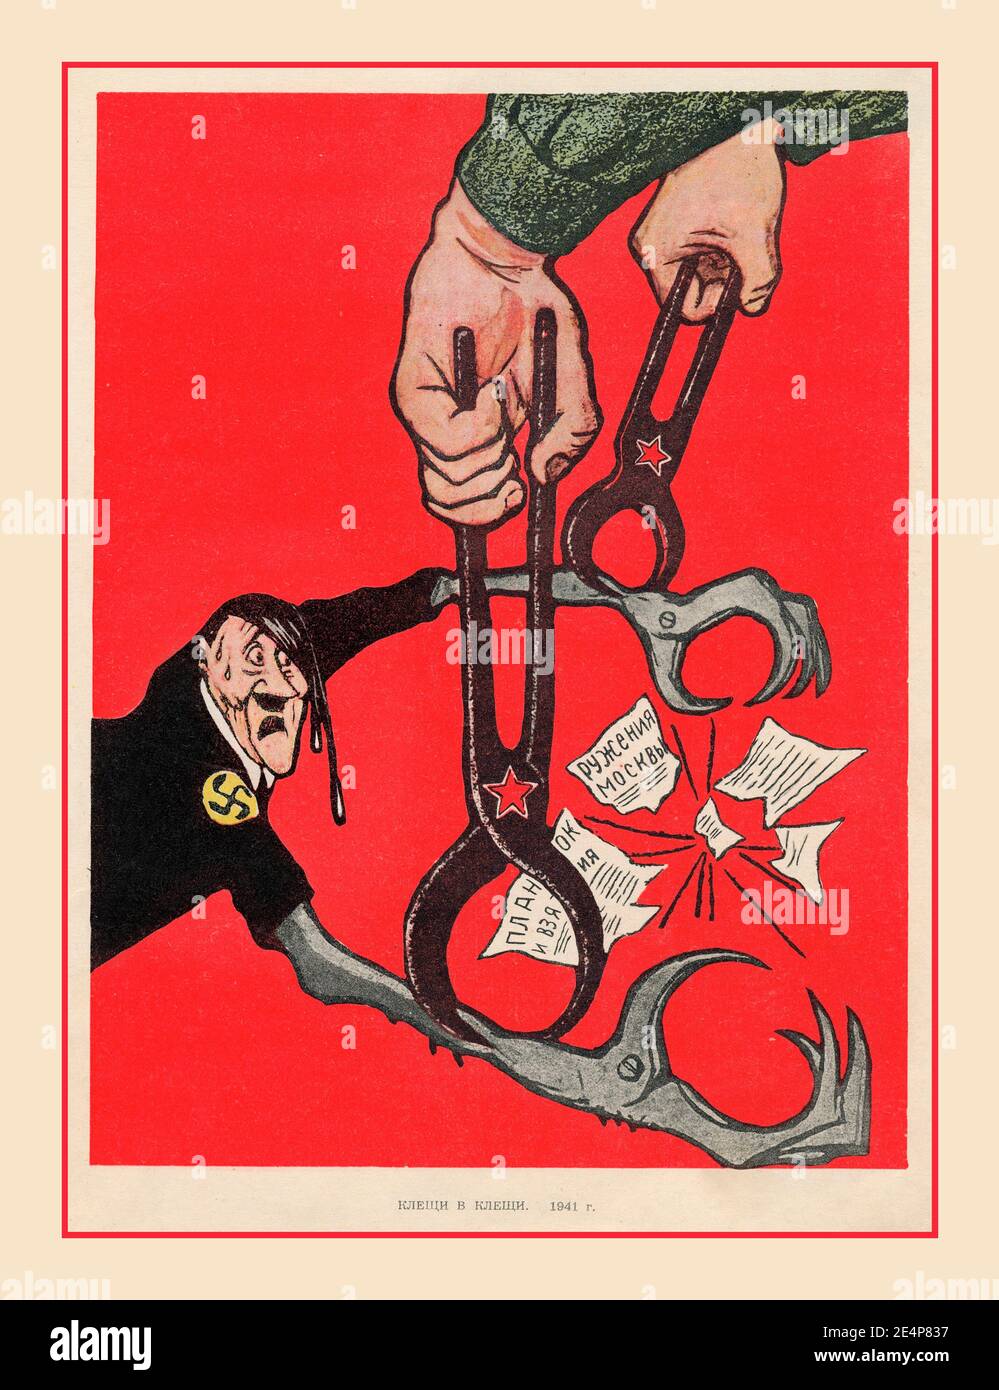 1941 WW2 Soviet Anti-Nazi poster caricature showing Adolf Hitler with jaw like pincer hands, pinched by two long grippers with Soviet-stars, December 1941 after failed attempt to conquer Moscow with Adolf Hitlers army. The Battle of Moscow was a military campaign that consisted of two periods of strategically significant fighting on a 600 km sector of the Eastern Front during World War II. It took place between October 1941 and January 1942 The determined Soviet defensive effort frustrated Hitler's attack on Moscow., Stock Photo